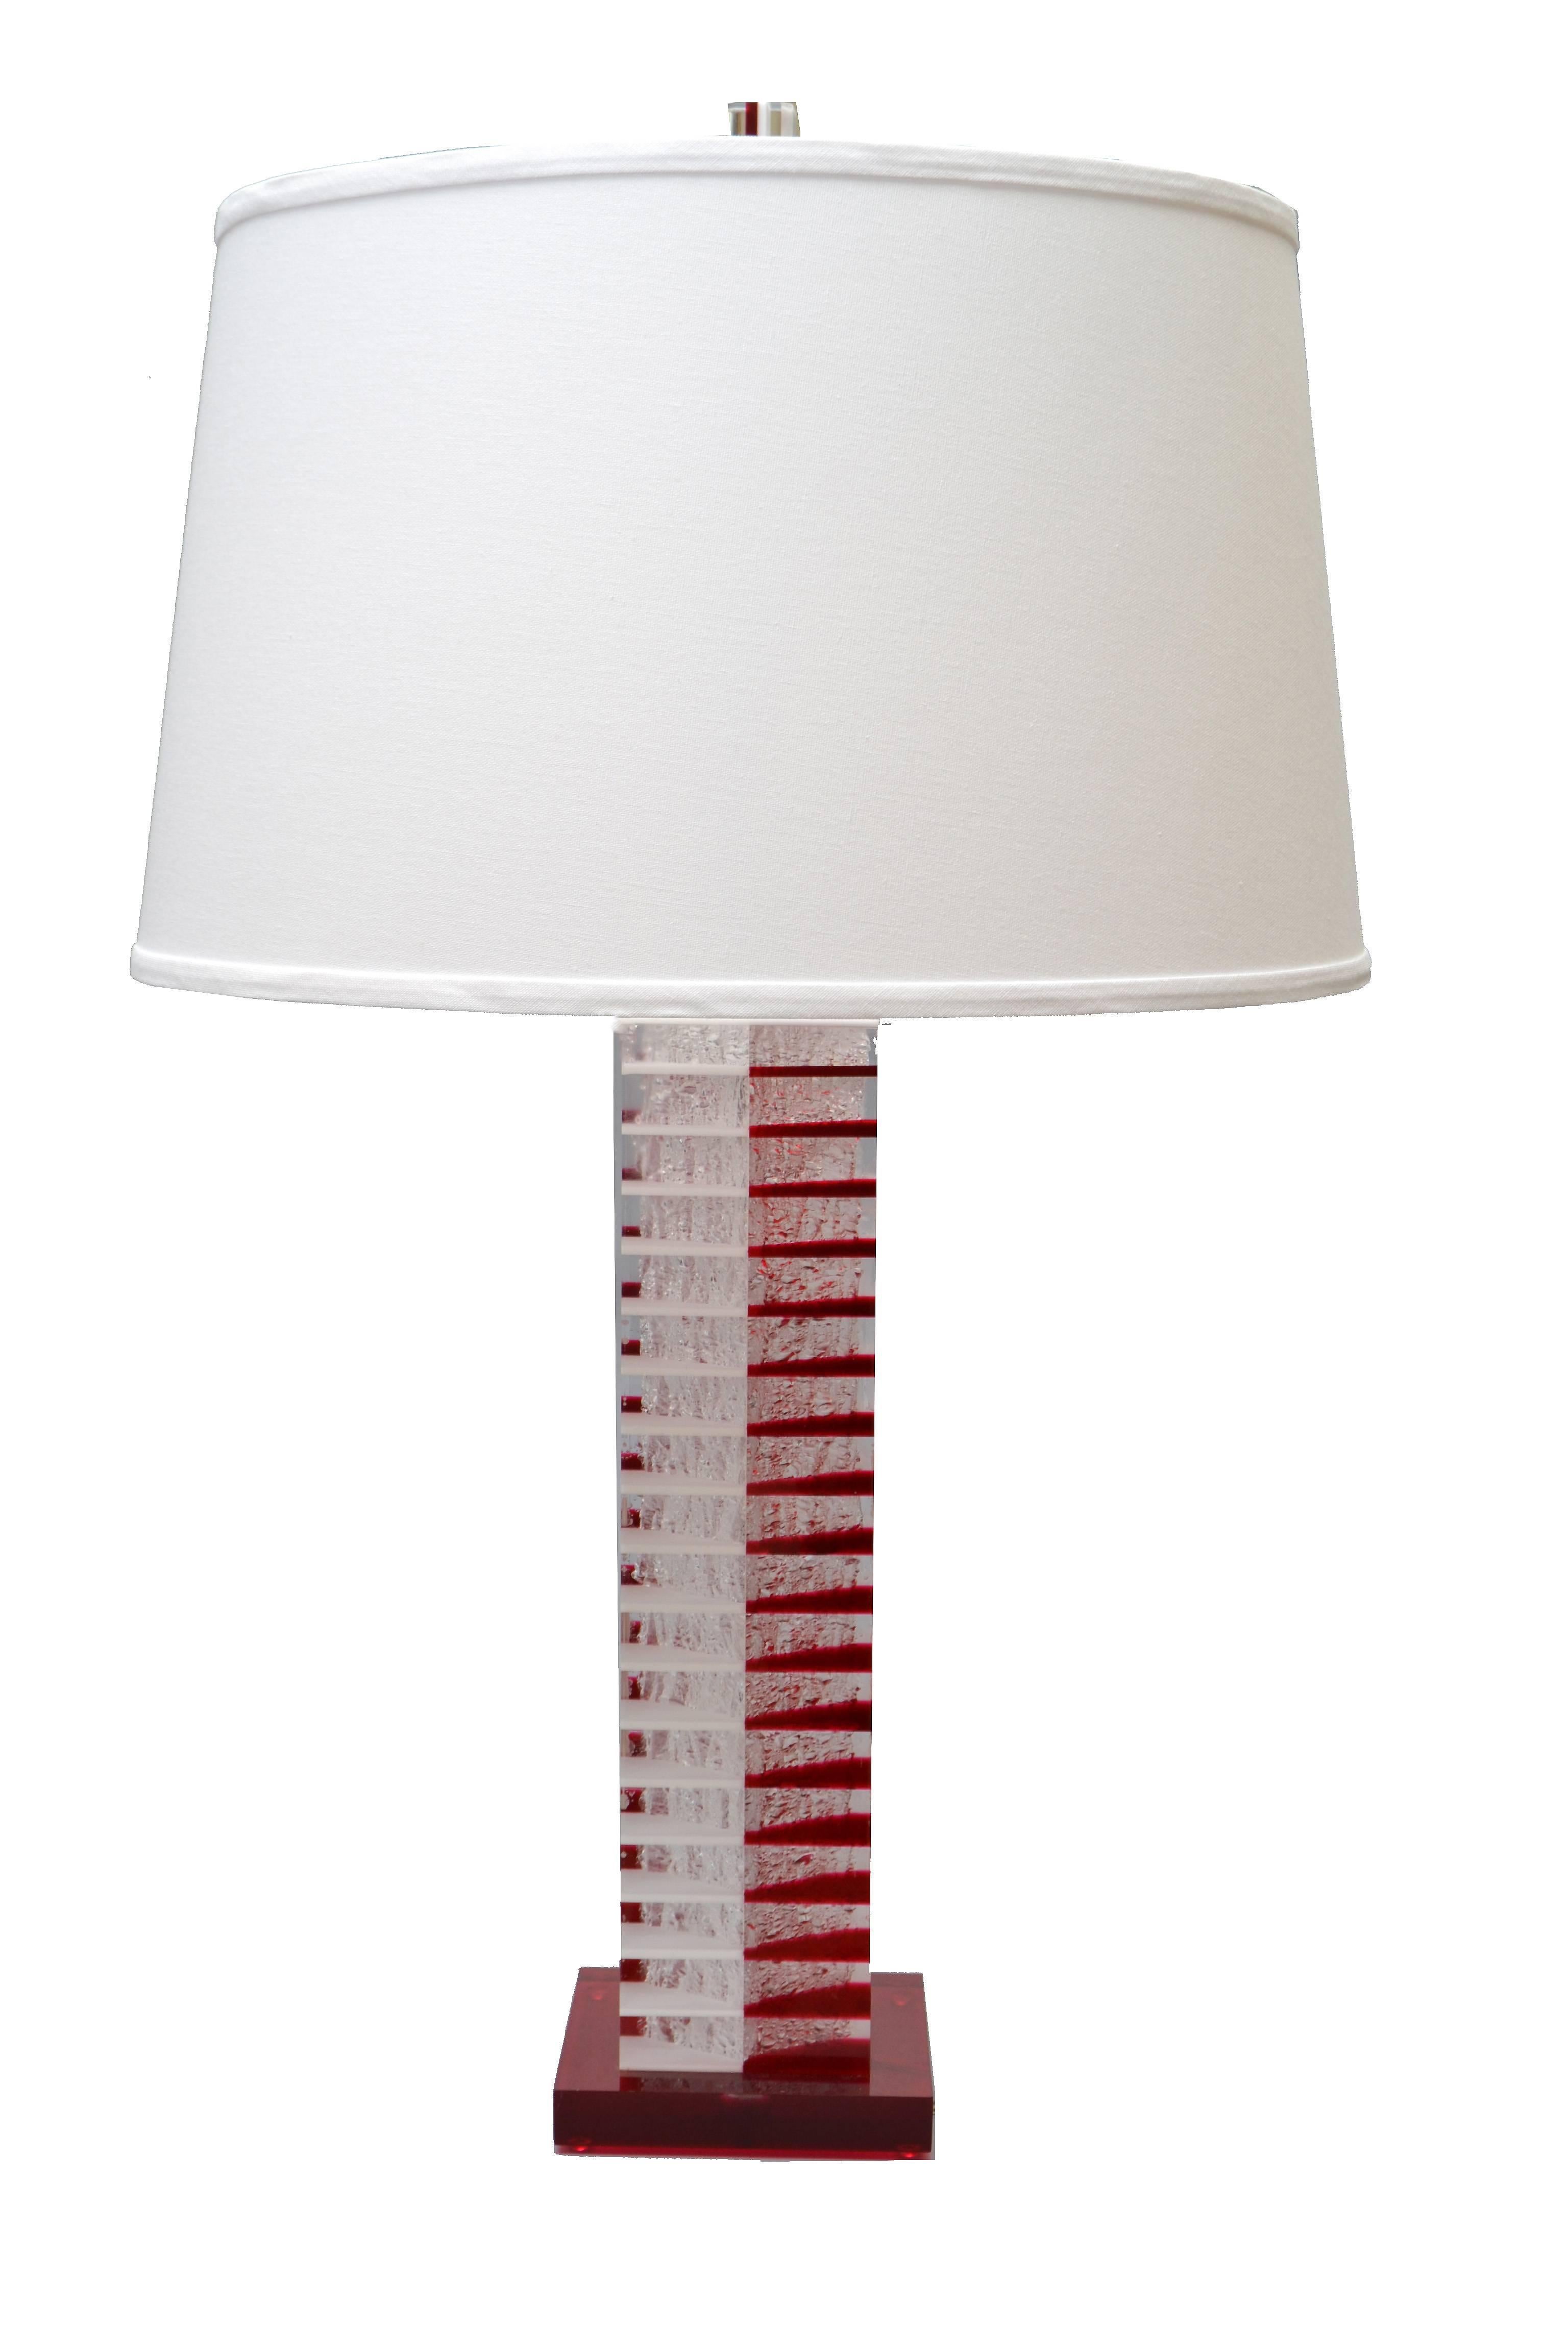 tall red lamps